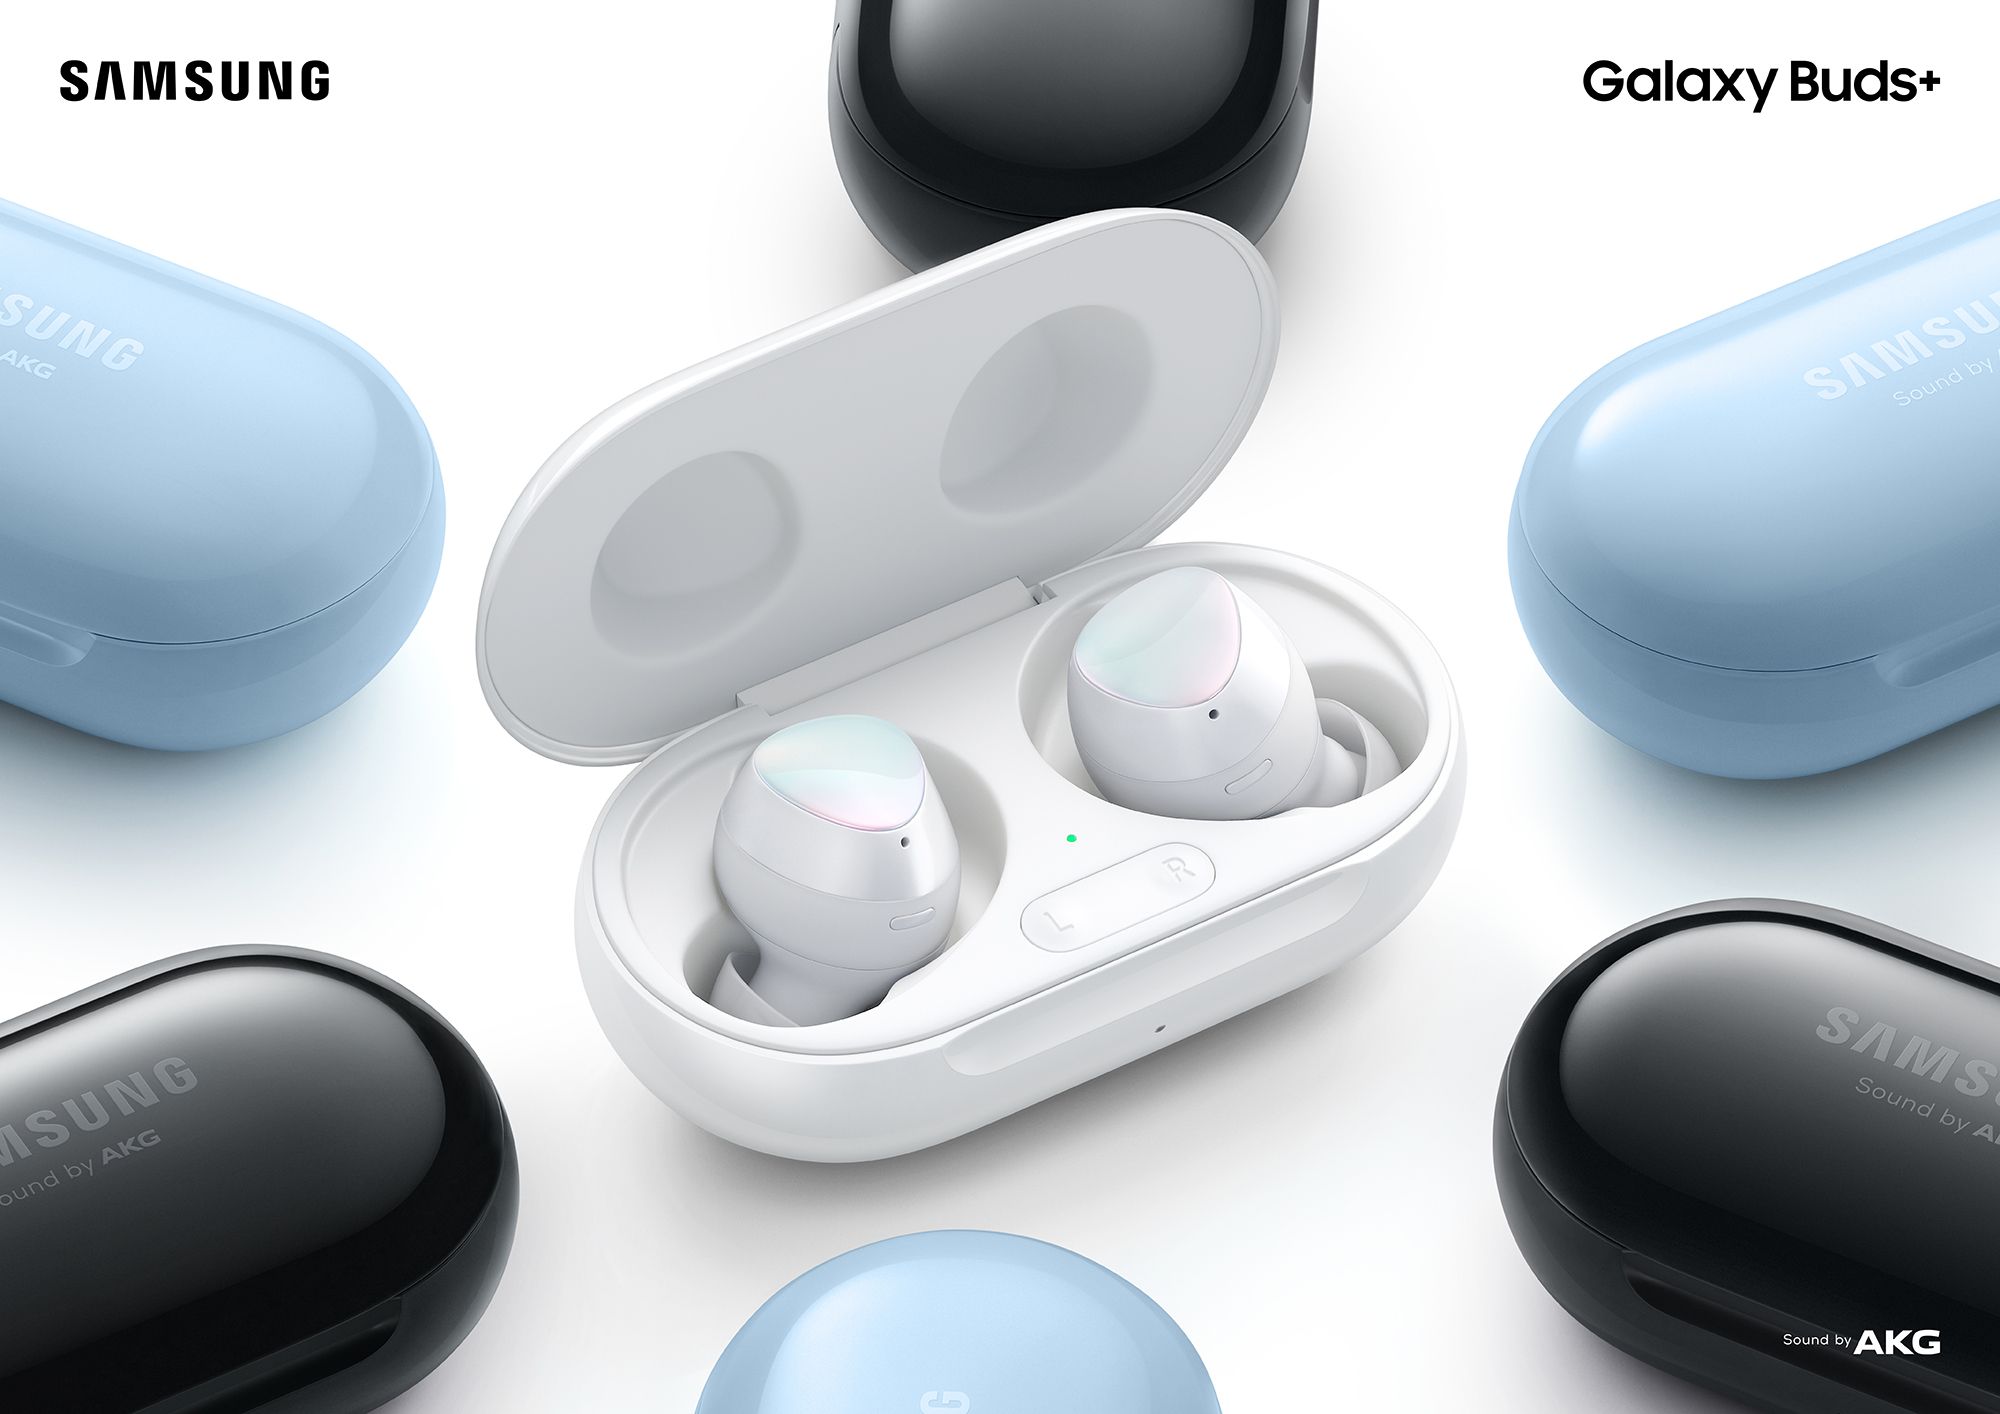 connect galaxy buds to pc galaxy buds pairing mode galaxy buds plus pairing mode galaxy buds iphone samsung galaxy buds app pair galaxy buds with laptop galaxy buds galaxy buds pro pair samsung buds connect galaxy buds to iphone connect galaxy buds to laptop galaxy buds pro pairing mode samsung galaxy buds iphone galaxy buds live pairing mode samsung pro buds galaxy buds app galaxy buds connect to pc samsung buds pairing mode connect samsung buds to laptop samsung galaxy buds pairing mode galaxy buds with iphone galaxy buds on iphone galaxy buds pc galaxy wearable ios samsung galaxy buds pro case galaxy buds live iphone galaxy buds app for pc pair galaxy buds with iphone samsung galaxy bluetooth pair galaxy buds to laptop samsung buds iphone galaxy buds pairing buds galaxy connect samsung galaxy buds to laptop connect samsung buds to pc pair samsung buds to laptop pairing galaxy buds plus galaxy wearable app for iphone samsung galaxy buds pairing iphone galaxy buds galaxy buds bluetooth pairing samsung galaxy buds connect to pc samsung galaxy buds with iphone galaxy buds connect to laptop connect galaxy buds live to pc galaxy buds plus iphone samsung buds connect to laptop connect galaxy buds pro to pc connect samsung buds to iphone galaxy buds pro connect to pc buds live pairing mode galaxy buds windows samsung wearable app ios galaxy wearable app buds samsung galaxy buds plus pairing mode samsung buds with iphone galaxy wearable iphone galaxy buds plus pairing samsung buds pairing galaxy buds on pc samsung buds connect samsung buds plus pairing mode pairing mode galaxy buds galaxy buds bluetooth samsung buds live pairing connect samsung buds galaxy buds live connect to pc samsung buds on iphone samsung buds pro pairing mode samsung galaxy buds bluetooth pair galaxy buds live galaxy buds to pc pair samsung buds to iphone galaxy buds laptop pair galaxy buds pro galaxy buds connect to iphone galaxy buds pc app buds plus pairing mode galaxy buds pro pc buds live iphone samsung buds pro iphone samsung galaxy phones galaxy phones samsung android phone samsung galaxy buds case samsung galaxy samsung phones samsung new mobile samsung galaxy buds plus samsung galaxy a galaxy buds+ galaxy wearable new galaxy phone android galaxy latest samsung mobile samsung galaxy apps new samsung galaxy samsung wearable samsung buds+ latest samsung galaxy phone samsung galaxy phones in order samsung galaxy new phone samsung g latest galaxy phone galaxy buds case samsung wearable app samsung galaxy mobile phones samsung galaxy laptop latest samsung galaxy samsung google galaxy phones in order samsung galaxy new mobile samsung android mobile iphone galaxy samsung device samsung galaxy headphones samsung mobile galaxy ios devices samsung galaxy samsung samsung galaxy live other devices samsung galaxy wearable the new galaxy phone galaxy buds not pairing samsung galaxy latest mobile galaxy mobile phones connect samsung phone to pc samsung galaxy as find my galaxy phone samsung galaxy buds live case galaxy android galaxy buds plus not connecting samsung galaxy samsung galaxy galaxy phone case samsung wearable app for pc galaxy buds not connecting to wearable app galaxy samsung galaxy samsung galaxy android samsung galaxy wearable app samsung find mobile the new samsung galaxy samsung galaxy android phone put galaxy buds in pairing mode samsung in ear headphones samsung galaxy a samsung phones new samsung laptop my mobile samsung find galaxy buds samsung new latest mobile samsung mobile s wearable galaxy samsung galaxy sa new samsungs samsung galaxy plus buds sam android samsung galaxy on galaxy a samsung phones samsung used phones iphone samsung galaxy galaxy wearable devices samsungs buds the new samsung galaxy phone app galaxy wearable samsung phone samsung phone samsung wearables app galaxy buds not working samsung galaxy buds wireless charging samsung galaxy computer samsung galaxy find my phone my samsung galaxy the latest galaxy phone galaxy bluetooth headphones samsung galaxy not charging galaxy new mobile the latest samsung galaxy phone galaxy buds discoverable galaxy buds work with iphone galaxy buds+ pairing mode www samsung galaxy samsung galaxy no samsung galaxy set samsung galaxy pc samsung buds not connecting pair samsung galaxy buds samsung android set find my samsung galaxy galaxy wearable app not compatible samsung galaxy buds pc galaxy buds features galaxy wearables app charge galaxy buds with phone samsung galaxy headphones wireless newest samsung galaxy buds galaxy a phones samsung android mobile phones samsung galaxy devices samsung phone samsung samsung galaxy buds live app galaxy samsung buds latest samsung galaxy buds galaxy buds pair with pc galaxy devices samsung galaxy manual samsung galaxy find my mobile samsung galaxy buds not connecting galaxy buds compatible with iphone samsung buds bluetooth pairing samsung buds pc samsung galaxy buds work with iphone samsung galaxy buds compatible with iphone pair galaxy buds with pc latest samsung android phone galaxy buds live pairing samsung galaxy features samsung galaxy buds connect to laptop galaxy buds pairing mode pc samsung galaxy buds live pairing samsung galaxy buds on iphone galaxy buds pair new device pair samsung galaxy buds to pc samsung galaxy buds features pairing galaxy buds to iphone connect galaxy buds to computer samsung galaxy buds pro pairing galaxy wearable app iphone pairing mode galaxy buds plus galaxy wireless headphones samsung mobile features galaxy buds plus not working samsung galaxy i galaxy buds live pc galaxy buds pc connection samsung galaxy switch latest samsung s galaxy buds plus pairing mode pc the samsung galaxy samsung galaxy buds connect to iphone galaxy buds plus bluetooth pairing google samsung galaxy using galaxy buds with iphone samsung galaxy buds compatibility newest galaxy s phone samsung buds pro connect to laptop find galaxy phone samsung galaxy buds latest put samsung buds in pairing mode samsung galaxy buds pro connect to pc samsung buds connect to iphone find your samsung phone samsung wearable ios samsung used mobiles wireless galaxy buds galaxy buds live on iphone galaxy buds not discoverable galaxy buds in pairing mode samsung galaxy bluetooth headphones latest galaxy s phone samsung galaxy buds not charging samsung buds connect to pc connect samsung phone to laptop galaxy iphone case samsung galaxy buds app for windows connect samsung galaxy buds find your samsung galaxy buds app pc samsung galaxy buds live connect to pc for samsung galaxy android and iphone difference connect samsung buds to computer connect buds live to pc samsung android apps can samsung pairing mode samsung buds galaxy buds live not connecting pair galaxy buds to pc samsung mobile new mobile samsung bluetooth buds galaxy buds for pc samsung buds plus connect to laptop samsung galaxy buds plus connect to pc galaxy buds plus with iphone connect galaxy buds to phone galaxy buds pro connect to iphone switch galaxy galaxy buds compatible iphone samsung galaxy buds+ iphone samsung new device switching from galaxy to iphone samsung galaxy recent phones galaxy buds plus connect pair buds live samsung galaxy at galaxy pro buds case device galaxy the galaxy phone used galaxy phones connect galaxy buds to samsung phone samsung android phone cases galaxy buds not connecting to iphone connect galaxy buds to new device samsung galaxy buds+ app samsung galaxy new set samsung galaxy windows bluetooth samsung galaxy buds samsung galaxy buds plus with iphone samsung galaxy buds live pairing mode samsung galaxy buds live compatibility galaxy buds plus on iphone latest samsung galaxy s wireless charging not working samsung samsung galaxy buds pro wireless charging galaxy buds not connecting to app pair galaxy buds pro with laptop buds galaxy samsung galaxy buds pro not connecting new galaxy a samsung buds live connect to laptop galaxy buds pair with iphone google galaxy phone samsung buds plus iphone samsung galaxy buds plus not connecting samsung galaxy pro buds case pair samsung buds with laptop connect buds live to laptop connect samsung headphones to laptop samsung galaxy not turning on new samsung galaxy m galaxy buds app windows galaxy buds pro compatible with iphone samsung buds app for pc pair galaxy buds to new device samsung galaxy new mobile phone samsung pairing buds pairing mode a galaxy phone samsung galaxy used use galaxy buds with pc samsung galaxy buds bluetooth pairing samsung galaxy buds pc app new mobile samsung new mobile new samsung galaxy a galaxy buds pro not connecting to wearable app samsung galaxy connect to pc connect galaxy buds pro to iphone bluetooth galaxy buds case samsung galaxy buds recent galaxy phones different samsung galaxy phones samsung buds not pairing galaxy android phones samsung galaxy buds plus pairing samsung buds discoverable samsung galaxy buds pro compatibility bluetooth samsung galaxy buds live samsung buds to iphone samsung galaxy apps not working buds+ pairing mode galaxy buds pro app for android new samsung android phones connect galaxy buds pro to laptop case for samsung galaxy buds latest samsung device samsung buds laptop samsung galaxy buds live compatible with iphone on a samsung galaxy samsung buds live pairing mode galaxy buds live connect to laptop samsung wearable for pc connect galaxy buds+ to pc turn on galaxy buds samsung galaxy buds difference pair galaxy buds plus with laptop galaxy buds pro pc connection new samsung ear buds latest samsung headphones galaxy latest mobile galaxy wearable for iphone connect samsung buds live to pc samsung buds pc app connect samsung galaxy buds to iphone samsung galaxy buds pro on iphone buds live connect to pc connect samsung galaxy buds to pc galaxy buds live connect galaxy buds plus compatibility samsung galaxy buds compatible devices latest galaxy s find my headphones samsung buds plus app samsung galaxy buds live work with iphone using galaxy buds plus with iphone galaxy buds live connect to iphone samsung buds on pc pair buds plus galaxy live buds pairing mode galaxy buds live app for pc galaxy buds app for windows put galaxy buds plus in pairing mode galaxy buds pro laptop buds for samsung galaxy buds+ pairing samsung galaxy buds app android galaxy phone settings galaxy buds pro connect samsung android laptop galaxy buds plus pc connection samsung android settings samsung device find galaxy buds no iphone samsung buds plus pairing connect samsung buds pro to laptop samsung galaxy buds samsung galaxy pro headphones samsung galaxy android mobile pair galaxy buds live with laptop samsung buds to pc samsung new mobile set samsung galaxy galaxy buds pair samsung buds live put galaxy buds pro in pairing mode samsung galaxy buds pro pairing mode galaxy buds bluetooth pairing mode samsung buds pro bluetooth pairing put galaxy buds live in pairing mode galaxy buds live compatible devices on my samsung galaxy galaxy buds pro pair which samsung galaxy app samsung wearable galaxy buds with pc add samsung buds to pc samsung new iphone samsung buds+ pairing mode samsung buds plus connect galaxy buds for windows samsung galaxy buds pro bluetooth pair galaxy buds+ buds live pairing samsung buds for iphone newest galaxy s app samsung galaxy buds galaxy wearable for ios samsung galaxy buds pair with laptop galaxy buds live bluetooth pairing latest samsung galaxy s phone galaxy wearable app on iphone galaxy wearable not connecting samsung galaxy ear pair galaxy buds with new device samsung galaxy buds pair with iphone samsung bluetooth ear buds galaxy buds a galaxy buds enter pairing mode galaxy buds galaxy buds pro galaxy buds+ samsung buds+ samsung pro buds galaxy buds pairing mode buds galaxy galaxy buds pairing samsung galaxy headphones galaxy buds bluetooth pairing galaxy buds pro pairing mode galaxy buds live pairing mode samsung galaxy buds app samsung buds pairing mode galaxy buds bluetooth samsung buds pairing samsung galaxy buds pairing samsung buds connect samsung galaxy buds pairing mode galaxy samsung buds samsung buds bluetooth pairing wireless galaxy buds samsung galaxy headphones wireless samsung bluetooth buds buds live pairing mode pairing mode galaxy buds galaxy buds+ pairing mode samsung buds live pairing buds galaxy samsung connect samsung buds samsung buds pro pairing mode samsung galaxy buds bluetooth pair galaxy buds live bluetooth galaxy buds pair galaxy buds pro galaxy buds live pairing buds for samsung bluetooth samsung galaxy buds buds pairing mode galaxy buds in pairing mode pairing mode samsung buds galaxy buds a samsung galaxy buds live pairing galaxy buds pair new device samsung galaxy buds pro pairing galaxy buds live connect galaxy buds+ pairing galaxy buds pro connect samsung galaxy buds bluetooth pairing samsung galaxy buds samsung samsung galaxy galaxy buds connect samsung galaxy buds connect galaxy buds to phone samsung galaxy ear buds+ pairing mode connect galaxy buds to samsung phone connect galaxy buds to new device samsung buds live pairing mode samsung galaxy buds live pairing mode galaxy live buds pairing mode pair galaxy buds to new device pair samsung buds live samsung galaxy buds pro pairing mode galaxy buds bluetooth pairing mode samsung buds pro bluetooth pairing samsung buds+ pairing mode pair galaxy buds+ buds live pairing galaxy buds live bluetooth pairing pair galaxy buds with new device samsung earbuds samsung buds samsung galaxy buds galaxy buds live samsung galaxy buds pro samsung buds live buds live galaxy buds 2 samsung galaxy buds+ galaxy earbuds samsung galaxy buds 2 buds samsung galaxy bud live galaxy pro buds samsung galaxy live buds samsung galaxy pro buds new galaxy buds galaxy buds samsung pairing galaxy buds samsung galaxy bud live samsung buds pro samsung wireless earbuds samsung earbuds pro samsung galaxy earbuds samsung buds 2 buds+ samsung live buds buds 2 samsung earbuds live buds pro samsung samsung bluetooth earbuds samsung galaxy earbuds pro samsung earbuds 2 samsung bud pro buds 2 samsung pairing samsung buds new samsung earbuds live buds galaxy buds connect earbuds galaxy samsung galaxy wireless earbuds buds+ samsung galaxy wireless earbuds samsung pro earbuds galaxy buds live samsung earbuds pro samsung galaxy earbuds 2 samsung ear new samsung buds samsung ear bud pairing samsung earbuds samsung galaxy pro earbuds samsung galaxy bluetooth earbuds connect galaxy buds new samsung galaxy buds samsung ear buds pro galaxy pro earbuds samsung earbuds pairing mode samsung live earbuds buds samsung galaxy samsung galaxy ear buds pro earbuds samsung pro samsung wireless earbuds for android galaxy bluetooth earbuds samsung new buds earbuds samsung galaxy new samsung headphones galaxy buds models galaxy buds in ear galaxy buds original galaxy buds new buds live 2 new galaxy earbuds all galaxy buds galaxy buds 2 samsung samsung galaxy earbuds 2 galaxy ear buds live connect samsung earbuds samsung buds galaxy samsung support galaxy buds samsung galaxy buds new original galaxy buds pairing samsung galaxy buds samsung buds new earbuds 2 samsung buy samsung galaxy buds samsung buds in ear galaxy buds buds+ samsung galaxy buds in ear galaxy headphones wireless galaxy buds+ samsung samsung galaxy buds original buy samsung earbuds galaxy earbuds pairing mode samsung galaxy buds wireless buy samsung buds earbuds for galaxy buds app samsung galaxy live earbuds samsung earbuds pairing samsung earbuds connect samsung headphones buds samsung galaxy buds support samsung buds bluetooth samsung earbuds bluetooth pairing galaxy earbud pro galaxy buds settings samsung earbuds galaxy samsung galaxy buds models galaxy buds wireless galaxy ear bud buds live galaxy connect your phone samsung wireless earbuds pro samsung buds original galaxy buds pro pairing samsung wireless bluetooth earbuds galaxy buds support connect to galaxy buds new samsung wireless earbuds new samsung galaxy earbuds galaxy buds 2 pairing mode galaxy ear buds 2 galaxy pairing buds live samsung original earbuds my galaxy buds samsung earbuds in ear new galaxy buds 2 samsung galaxy buds connect galaxy buds all models samsung buds samsung samsung new galaxy buds samsung galaxy buds earbuds all samsung buds all samsung earbuds ear bud samsung galaxy buds buds samsung galaxy buds buy samsung buds support the new samsung earbuds samsung buds models new buds samsung new earbuds samsung samsung galaxy in ear buds used galaxy buds samsung buds all models galaxy galaxy buds samsung buds wireless samsung earbuds models earbuds bluetooth samsung wireless earbuds for samsung galaxy samsung galaxy ear bud earbuds samsung original connect earbuds to samsung phone galaxy buds headphones samsung galaxy earbuds pairing mode samsung bluetooth earbuds pairing galaxy new buds galaxy earbuds samsung samsung in ear earbuds samsung earbud pairing connect galaxy buds live earbuds of samsung using galaxy buds galaxy 2 buds all samsung galaxy buds samsung headphones galaxy buds bluetooth samsung buds samsung buds headphones galaxy buds used the galaxy buds galaxy buds android samsung android earbuds samsung bluetooth galaxy buds samsung buds live connect connect to samsung earbuds samsung buds buy samsung galaxy buds new model samsung buds new model connect buds live samsung galaxy 2 earbuds samsung in ear wireless headphones galaxy buds earbuds buds buds+ original samsung galaxy buds galaxy buds live support buy galaxy buds+ connect galaxy buds pro buds headphones samsung galaxy earbuds connect earbuds for android samsung galaxy buds new model in ear buds samsung galaxy 2 earbuds galaxy new earbuds buds live connect samsung galaxy buds headphones galaxy in ear buds galaxy live bud samsung galaxy buds wireless earbuds samsung earbuds all models samsung galaxy new buds using samsung earbuds samsung buds settings samsung galaxy buds+ wireless earbuds connect galaxy buds to 2 devices galaxy ear bud pro original samsung buds earbuds wireless for samsung pair galaxy earbuds galaxy earbuds bluetooth buy samsung galaxy buds+ samsung wireless ear samsung headphones earbuds all samsung wireless earbuds samsung wireless earbuds pairing samsung app for earbuds samsung buds pro pairing pair samsung buds pro galaxy buds pro bluetooth pairing the new galaxy earbuds earbuds samsung 2 pairing mode galaxy buds pro samsung galaxy 2 buds connect galaxy earbuds galaxy buds connect to new device new samsung bluetooth earbuds buds pro pairing earbuds for galaxy phone galaxy ear phones connect galaxy buds to android samsung samsung galaxy buds headphone galaxy buds samsung earbuds galaxy buds galaxy buds+ bluetooth galaxy buds on ear bluetooth samsung galaxy buds+ connect samsung bluetooth earbuds galaxy buds bluetooth connection samsung galaxy wireless buds+ buds+ pairing samsung galaxy ear phones samsung earbuds live pairing samsung with earbuds samsung buds buds+ samsung galaxy buds wireless headphones setting up samsung earbuds pairing mode for samsung earbuds new samsung headphones wireless pair buds pro samsung galaxy buds connect bluetooth samsung buds pro connect samsung galaxy buds used galaxy buds connect to phone wireless samsung galaxy buds samsung earbuds pro bluetooth pairing samsung earbuds buds galaxy samsung headphones buy samsung galaxy earbuds buds+ galaxy samsung earbuds samsung samsung galaxy in ear headphones new samsung buds live android galaxy buds connect to samsung buds earbuds by samsung buy galaxy earbuds wireless samsung buds samsung galaxy buds+ pairing mode earbuds samsung wireless samsung buds live bluetooth pairing pairing mode galaxy buds live samsung earbuds in pairing mode bud's pro samsung galaxy buds buds+ connect galaxy buds to new phone galaxy buds+ in ear samsung galaxy buds+ pairing galaxy buds ear the samsung galaxy buds samsung live buds pairing samsung earbuds pro pairing the new samsung galaxy buds galaxy earbuds pairing galaxy buds 2 pairing samsung earbuds pro pairing mode galaxy buds galaxy buds+ samsung all earbuds samsung galaxy buds help pair galaxy live buds buds buds live galaxy samsung buds 2 samsung wireless galaxy buds samsung samsung galaxy buds+ samsung buds in pairing mode buds buds pro pairing earbuds to samsung phone galaxy buds galaxy buds used samsung buds galaxy buds connect to 2 devices used samsung galaxy buds using galaxy buds pro buds samsung 2 galaxy earbuds new galaxy buds connect 2 devices new samsung galaxy headphones samsung live buds pairing mode samsung galaxy buds buds bluetooth earbuds samsung galaxy samsung in ear galaxy buds samsung galaxy buds live connect galaxy buds+ connect samsung earbuds connect bluetooth samsung buds earbuds galaxy phone earbuds galaxy buds+ 2 the samsung earbuds new samsung galaxy buds 2 samsung galaxy buds connect to phone samsung galaxy earbuds bluetooth galaxy buds connect bluetooth samsung galaxy buds live support galaxy buds live connection samsung galaxy buds live bluetooth pairing buds live buds samsung earbuds for android galaxy buds connect new device samsung buds 2 pairing samsung earbuds used the galaxy earbuds samsung phone with galaxy buds connect samsung buds live setting up galaxy buds pro set up galaxy buds pro samsung buds buds pair galaxy buds 2 galaxy earbuds pro pairing mode galaxy buds set up samsung buds+ pairing samsung galaxy buds+ earbuds earbuds samsung bluetooth pairing samsung bluetooth earbuds earbuds from samsung connect earbuds samsung samsung buds used connect samsung buds to android pairing my galaxy buds galaxy bud live pairing mode galaxy buds 2 galaxy buds pro connect galaxy buds+ pairing mode for galaxy buds buds live original samsung with buds galaxy buds help galaxy buds live bluetooth connection the new samsung galaxy earbuds samsung galaxy earbuds pairing buds pro connect galaxy buds use earbuds samsung connect bluetooth earbuds galaxy new samsung buds 2 galaxy buds+ buy connecting samsung wireless earbuds samsung galaxy buds pro bluetooth pairing samsung wireless bud samsung galaxy buds android android earbuds samsung pair samsung buds+ samsung bluetooth galaxy buds+ samsung galaxy earbuds new pair earbuds samsung samsung earbud support pairing mode samsung earbuds galaxy buds all samsung buds connect to 2 devices pair samsung galaxy buds live samsung galaxy buds pro connect samsung galaxy with earbuds android galaxy earbuds pair with galaxy buds samsung earbuds bluetooth wireless samsung earbuds bluetooth connection pair samsung wireless earbuds samsung buds ear samsung galaxy buds+ buy new galaxy wireless earbuds bluetooth earbuds for samsung galaxy sam galaxy buds samsung wireless earbuds 2 samsung galaxy buds set up samsung wireless galaxy earbuds connect buds pro galaxy buds pro set up samsung samsung earbuds set up samsung buds galaxy earbuds in ear galaxy buds pro connect 2 devices samsung bluetooth headphones buds galaxy new headphones wireless samsung galaxy earbuds samsung earbuds wireless bluetooth galaxy buds pair 2 devices new buds live samsung galaxy earbuds connect samsung support earbuds galaxy buds pair to new device galaxy buds and buds+ samsung android wireless earbuds samsung earbuds pro connect galaxy buds+ support buds 2 app samsung earbuds help samsung samsung buds samsung buds 2 pairing mode using samsung buds earbuds for a samsung galaxy buds setting earbuds for a samsung galaxy phone live buds 2 samsung buds help samsung buds and buds+ samsung galaxy buds+ support galaxy buds galaxy in ear galaxy buds earbuds samsung new wireless bluetooth earbuds for samsung galaxy buds wireless earbuds samsung wireless earbuds new samsung wireless bluetooth galaxy buds buy samsung wireless earbuds pair headphones to samsung phone samsung galaxy with buds used galaxy earbuds earbuds for samsung android galaxy buds i pairing samsung galaxy buds pro using samsung galaxy buds samsung galaxy buds ear samsung galaxy phone earbuds samsung galaxy earbuds bluetooth connection bluetooth galaxy earbuds galaxy buds by samsung wireless earbuds galaxy buds samsung buds use galaxy samsung wireless earbuds samsung wireless ear bud samsung buds set up samsung galaxy earbuds in ear buds buds 2 pair galaxy buds with 2 devices pair galaxy bud live samsung earbuds android samsung galaxy buds phone samsung galaxy buds bluetooth headphones galaxy earbuds support bluetooth earbuds for galaxy samsung galaxy wireless bluetooth earbuds samsung buds a samsung galaxy buds 2 pairing headphones samsung galaxy buds samsung buds android samsung buds on ear about samsung galaxy buds galaxy buds with phone samsung galaxy buds on ear earbuds for samsung galaxy phone galaxy buds for android samsung galaxy earbuds support wireless earbuds for galaxy phone samsung original galaxy buds headphones buds samsung samsung wireless headphones pairing galaxy buds for samsung galaxy buds wireless headphones buy samsung buds+ pairing samsung earbuds pro the samsung buds galaxy buds menu earbud samsung headphones original samsung wireless earbuds samsung galaxy wireless bluetooth samsung next wireless earbuds samsung with galaxy buds samsung wireless earbuds galaxy galaxy buds on android buds by samsung samsung wireless buds+ new earbuds for samsung used samsung galaxy earbuds the new samsung wireless earbuds connect galaxy buds to pc bluetooth connect pair phone galaxy buds pairing mode pair bluetooth pairing mode galaxy buds iphone galaxy buds samsung galaxy buds pair galaxy buds pair device connect to phone pair samsung buds connect galaxy buds to iphone galaxy buds pc connect to new device galaxy buds connect to pc samsung buds pairing mode galaxy buds samsung samsung galaxy buds pairing mode connect galaxy buds galaxy buds with iphone galaxy buds on iphone bluetooth mode pair galaxy buds with iphone iphone bluetooth settings samsung galaxy buds iphone samsung galaxy bluetooth bluetooth pairing android connect my bluetooth pair iphone galaxy buds pairing buds galaxy pair my phone connect samsung buds to iphone connect samsung buds to pc pair bluetooth device iphone bluetooth pairing settings bluetooth connect bluetooth device galaxy buds connect pair new device samsung galaxy buds pairing galaxy buds bluetooth pairing connect new device galaxy buds on pc samsung galaxy buds connect to pc buds iphone connect my phone samsung galaxy buds with iphone samsung buds iphone galaxy buds to pc bluetooth pairing mode bluetooth connection for pc pair my device galaxy buds connect to iphone samsung buds pairing galaxy buds new iphone galaxy buds samsung buds connect pairing mode galaxy buds galaxy buds+ pairing mode galaxy buds bluetooth connect samsung buds pair samsung galaxy buds buds samsung galaxy samsung galaxy buds bluetooth iphone pairing mode samsung galaxy buds pc pair samsung buds to iphone samsung bluetooth settings using galaxy buds with iphone bluetooth in iphone galaxy buds for iphone samsung galaxy buds new galaxy buds pair with pc samsung buds bluetooth pairing samsung buds with iphone samsung buds pc samsung galaxy buds connect samsung galaxy buds on iphone galaxy buds pair new device bluetooth on my phone pairing mode samsung pair samsung galaxy buds to pc pairing galaxy buds to iphone connect galaxy buds to computer galaxy buds 2 iphone galaxy buds to iphone pair device with iphone pair my bluetooth samsung bluetooth pairing mode your phone bluetooth galaxy buds pc connection samsung galaxy buds connect to iphone samsung buds on iphone connect to my bluetooth connect to galaxy buds galaxy buds 2 pairing mode buds pairing mode samsung buds connect to iphone connect to my new device galaxy buds in pairing mode samsung buds connect to pc connect samsung galaxy buds connect samsung buds to computer pair galaxy buds with pc android bluetooth settings pairing mode samsung buds pairing mode iphone pair galaxy buds to pc galaxy buds pairing mode pc galaxy buds for pc pair a new device android pair connect phone to bluetooth connect iphone to pc bluetooth iphone bluetooth pairing with other phone connect galaxy buds to phone connect phone to pc bluetooth bluetooth is connected pairing mode android samsung galaxy buds for iphone connect galaxy buds to samsung phone connect galaxy buds to new device bluetooth settings on my phone bluetooth samsung galaxy buds samsung pairing mode galaxy buds 2 connect to pc find bluetooth device iphone pair galaxy buds to new device samsung pairing use galaxy buds with pc samsung galaxy buds bluetooth pairing pair iphone with computer connect phone to computer bluetooth connect the bluetooth bluetooth galaxy buds connect bluetooth to computer pair new device iphone buds+ pairing mode connect my phone to bluetooth all samsung galaxy buds connect galaxy buds+ to pc iphone buds 2 pair new device bluetooth new samsung ear buds new bluetooth device connect samsung galaxy buds to pc connect to galaxy buds in case pair devices on bluetooth galaxy buds pair with iphone galaxy buds en iphone mode pairing a pair phone android bluetooth connect samsung buds on pc bluetooth device is connected pair ear buds galaxy buds+ pairing connect phone to phone connect bluetooth to phone connect phones you connect phone galaxy buds computer galaxy buds and iphone samsung buds to pc android pairing mode connect samsung buds to phone the bluetooth device is connected galaxy buds bluetooth pairing mode bluetooth connect bluetooth connect bluetooth connection device pair phone to bluetooth galaxy buds with pc samsung buds+ pairing mode samsung bluetooth connect pair galaxy buds+ samsung buds for iphone connect a phone bluetooth connect 2 devices connect samsung galaxy buds to iphone pair my bluetooth device connect galaxy buds to 2 devices samsung bluetooth ear buds galaxy buds a pairing android phone galaxy buds enter pairing mode samsung buds to iphone samsung buds bluetooth pairing to computer samsung galaxy buds 2 iphone pair samsung buds to pc my bluetooth device connect my galaxy buds to my computer connect bluetooth to iphone pairing iphone to iphone galaxy buds buds bluetooth your phone connect my bluetooth to my phone pair galaxy buds to computer connect buds to pc pair samsung buds with iphone paired devices bluetooth android connect ear buds connect 2 bluetooth devices to android buds pc connect phone to pairing devices on iphone connect a bluetooth galaxy buds connect to computer pair phone cases samsung galaxy buds on pc connect iphone to galaxy buds galaxy buds connect to new device connect galaxy buds to android bluetooth bluetooth connect galaxy galaxy buds using galaxy buds with pc connect a new device galaxy buds bluetooth pc samsung buds pair with pc connect new bluetooth device samsung galaxy galaxy buds connect android to pc bluetooth galaxy buds bluetooth connection bluetooth on this device buds+ pairing galaxy buds 2 with iphone pair new bluetooth device pair galaxy buds with new device phone pairing iphone samsung galaxy buds pair with iphone pair my iphone find my galaxy buds on iphone connect bluetooth to my phone pair phone to computer connect buds to iphone pair a device to bluetooth bluetooth connect bluetooth phone bluetooth connect connect iphone to computer bluetooth the newest galaxy buds pairing a device with bluetooth samsung galaxy buds connect bluetooth set bluetooth on pairing mode on iphone samsung buds pair with iphone connect to samsung buds paired devices iphone galaxy new buds galaxy buds into pairing mode use galaxy buds on pc samsung galaxy buds to pc samsung bluetooth pairing samsung galaxy buds+ pairing mode pair a new bluetooth device pairing samsung phone pair samsung ear buds galaxy buds pair to pc iphone samsung buds use samsung buds on pc connect galaxy buds to new phone phone pairing mode pairing on iphone connect galaxy buds 2 to pc using galaxy buds connect to new phone samsung galaxy buds+ pairing samsung buds pc bluetooth pair samsung galaxy buds to iphone galaxy buds en pc bluetooth for your phone galaxy buds 2 pairing set pairing android get connected bluetooth devices pairing a device with iphone enter pairing mode samsung buds in pairing mode the galaxy buds galaxy buds android pair your device connect to 2 bluetooth devices samsung ear buds pairing galaxy buds connect to 2 devices galaxy buds iphone pairing connect my bluetooth device galaxy buds a pc galaxy buds connect 2 devices which galaxy buds iphone bluetooth 2 devices pair galaxy buds with computer connect to my android phone pair galaxy buds iphone pairing devices on bluetooth connect 2 bluetooth devices to iphone galaxy buds+ connect set my bluetooth pair computer pair iphone with pc find your galaxy buds paired devices on my phone bluetooth mode on connect bluetooth to 2 devices connect 2 bluetooth devices samsung pair ear buds with iphone galaxy buds pro samsung galaxy buds pro galaxy pro buds samsung galaxy pro buds galaxy buds pairing mode connect galaxy buds to pc galaxy buds iphone galaxy buds samsung buds samsung galaxy buds galaxy buds live samsung galaxy buds live samsung buds pro buds pro pair galaxy buds galaxy earbuds samsung earbuds pro galaxy buds pro iphone galaxy buds windows 10 bluetooth device samsung wireless earphones connect bluetooth bluetooth settings buds pro samsung pair samsung buds galaxy earbuds pro bluetooth pairing bluetooth device for pc samsung bluetooth earbuds galaxy buds pro app galaxy buds plus pairing mode pair phone samsung galaxy earbuds pro galaxy buds pro pairing mode galaxy buds live pairing mode samsung pro buds add bluetooth to pc connect to my device galaxy buds app samsung galaxy buds app pair galaxy buds with laptop connect computer galaxy headphones new galaxy buds galaxy buds pro samsung pairing mode bluetooth phone samsung buds pairing mode samsung bud pro galaxy buds samsung pairing samsung earbuds connect samsung buds to laptop best galaxy buds connect galaxy buds galaxy buds live pro earphone connection galaxy wearable app ios galaxy buds with iphone galaxy buds on iphone bluetooth on pc connect galaxy buds to iphone bluetooth earphone samsung galaxy buds pc new samsung earbuds connect bluetooth headphones to pc galaxy wearable ios bluetooth on mac samsung galaxy ear buds pair device bluetooth mode samsung earbuds pairing mode samsung galaxy buds pro case windows turn on bluetooth galaxy buds live iphone connect galaxy buds to laptop iphone bluetooth settings samsung galaxy buds iphone connect to phone galaxy buds pro ios bluetooth connect headphone samsung pro earbuds samsung galaxy bluetooth connect a device connect to my headphones galaxy buds pro app for iphone galaxy buds pro windows 10 bluetooth computer galaxy buds app for iphone connect my device galaxy buds charging case bluetooth pairing android galaxy buds connect to pc pair bluetooth headphones connect my bluetooth samsung buds iphone galaxy buds pairing galaxy buds plus iphone earbuds pro samsung connect to device samsung galaxy buds pairing mode connect galaxy buds to macbook connect to new device turn my bluetooth on buds galaxy galaxy buds windows bluetooth on laptop galaxy buds pro charging case connect phone connect bluetooth headphones to mac android connect pair my phone galaxy buds iphone app phone connect connect bluetooth headphones to laptop samsung galaxy pro earbuds wireless earbuds for samsung connect samsung earbuds to pc connect earbuds to laptop connect samsung buds to pc pair samsung buds to laptop iphone bluetooth pairing galaxy buds app for pc samsung earbuds app galaxy buds connect pair galaxy buds with iphone connect samsung earbuds to laptop connect headphones connect bluetooth headphones samsung ear buds pro connect earbuds to iphone galaxy buds pro on iphone galaxy wearable app for iphone connect earbuds buds earphones galaxy buds plus windows 10 galaxy buds windows 10 app galaxy pro earbuds galaxy buds plus app turn bluetooth on mac pair earbuds to iphone pair galaxy buds to laptop connect galaxy buds to ipad galaxy buds bluetooth pairing galaxy buds ipad samsung galaxy ear buds pro samsung galaxy buds pro iphone connect samsung earbuds buds iphone bluetooth connect earphone connect my phone bluetooth settings android galaxy buds pro iphone app bluetooth search samsung galaxy buds charging case samsung galaxy buds pro app galaxy buds pro with iphone galaxy ear buds pro earbuds samsung pro samsung galaxy buds with iphone new galaxy buds pro pairing earbuds buds bluetooth samsung buds windows 10 pair iphone galaxy buds pro wireless charging samsung wireless earbuds for android connect galaxy buds live to pc connect wireless headphones to laptop samsung buds connect to laptop connect galaxy buds pro to pc buds pro iphone set up headphones connect samsung buds to iphone samsung earbuds connect to laptop connect samsung galaxy buds to laptop galaxy buds pro connect to pc windows 10 bluetooth headphones buds live pairing mode connect to laptop galaxy earphones samsung wearable app ios galaxy buds macbook galaxy wearable app buds bluetooth pairing mode on this windows device turn on bluetooth bluetooth device for laptop samsung buds with iphone add bluetooth device connect to headphones bluetooth connection for pc pairing galaxy buds plus uses of bluetooth galaxy buds app windows 10 laptop connect pair my device earbuds samsung plus galaxy wearable iphone samsung galaxy buds windows 10 galaxy buds pro pc samsung galaxy buds iphone app computer bluetooth device samsung buds pairing samsung galaxy buds pairing samsung earbuds iphone pair bluetooth device iphone galaxy buds bluetooth settings windows 10 galaxy buds pro ios app connect bluetooth device samsung galaxy bluetooth earbuds connect galaxy buds to mac galaxy bluetooth galaxy buds on pc bluetooth on iphone galaxy buds pro plus connect bluetooth headphones to macbook samsung buds connect samsung galaxy buds connect to pc galaxy earbuds pairing mode set up my headphones samsung buds plus pairing mode bluetooth headphones for laptop galaxy buds pro earbuds pair ipad to iphone pairing mode galaxy buds android bluetooth get connected devices buds live iphone galaxy buds bluetooth samsung buds live pairing pair new device galaxy buds ios connect samsung buds galaxy buds live connect to pc galaxy earbuds app galaxy buds plus connect to laptop use of bluetooth turn on bluetooth pc samsung buds on iphone connect samsung earbuds to iphone the bluetooth device galaxy buds connect to laptop samsung earbuds pairing samsung buds pro pairing mode connect new device samsung earbuds connect buds samsung galaxy samsung galaxy buds plus iphone samsung buds pro iphone turn bluetooth samsung galaxy buds bluetooth galaxy wearable buds search bluetooth devices pair galaxy buds live device connections samsung galaxy buds live iphone iphone pairing mode add bluetooth samsung earbuds bluetooth pairing galaxy buds to pc pair headphones to iphone connect samsung buds to macbook pair headphones add bluetooth device windows 10 buds samsung pro connect my headphones connecting phone to computer bluetooth turn on ear phone connection pair samsung buds to iphone samsung galaxy buds plus pairing mode galaxy buds pro in ear samsung bluetooth settings bluetooth for laptop windows 10 samsung buds pro app galaxy buds for iphone galaxy buds laptop app galaxy buds galaxy buds app android galaxy buds live with iphone pair galaxy buds pro connect bluetooth headphones to windows 10 connect bluetooth to macbook samsung buds plus app galaxy buds pro bluetooth galaxy buds connect to iphone galaxy buds plus pairing galaxy bluetooth earbuds galaxy buds pc app buds plus pairing mode connected devices to my phone bluetooth link bluetooth headphones for computer turn on my headphones samsung galaxy buds pro charging case samsung galaxy buds galaxy buds pairing mode how to connect galaxy buds to windows 10 how to pair galaxy buds with laptop galaxy buds not pairing how to connect galaxy buds to ipad how to pair galaxy buds to switch how to connect galaxy buds live